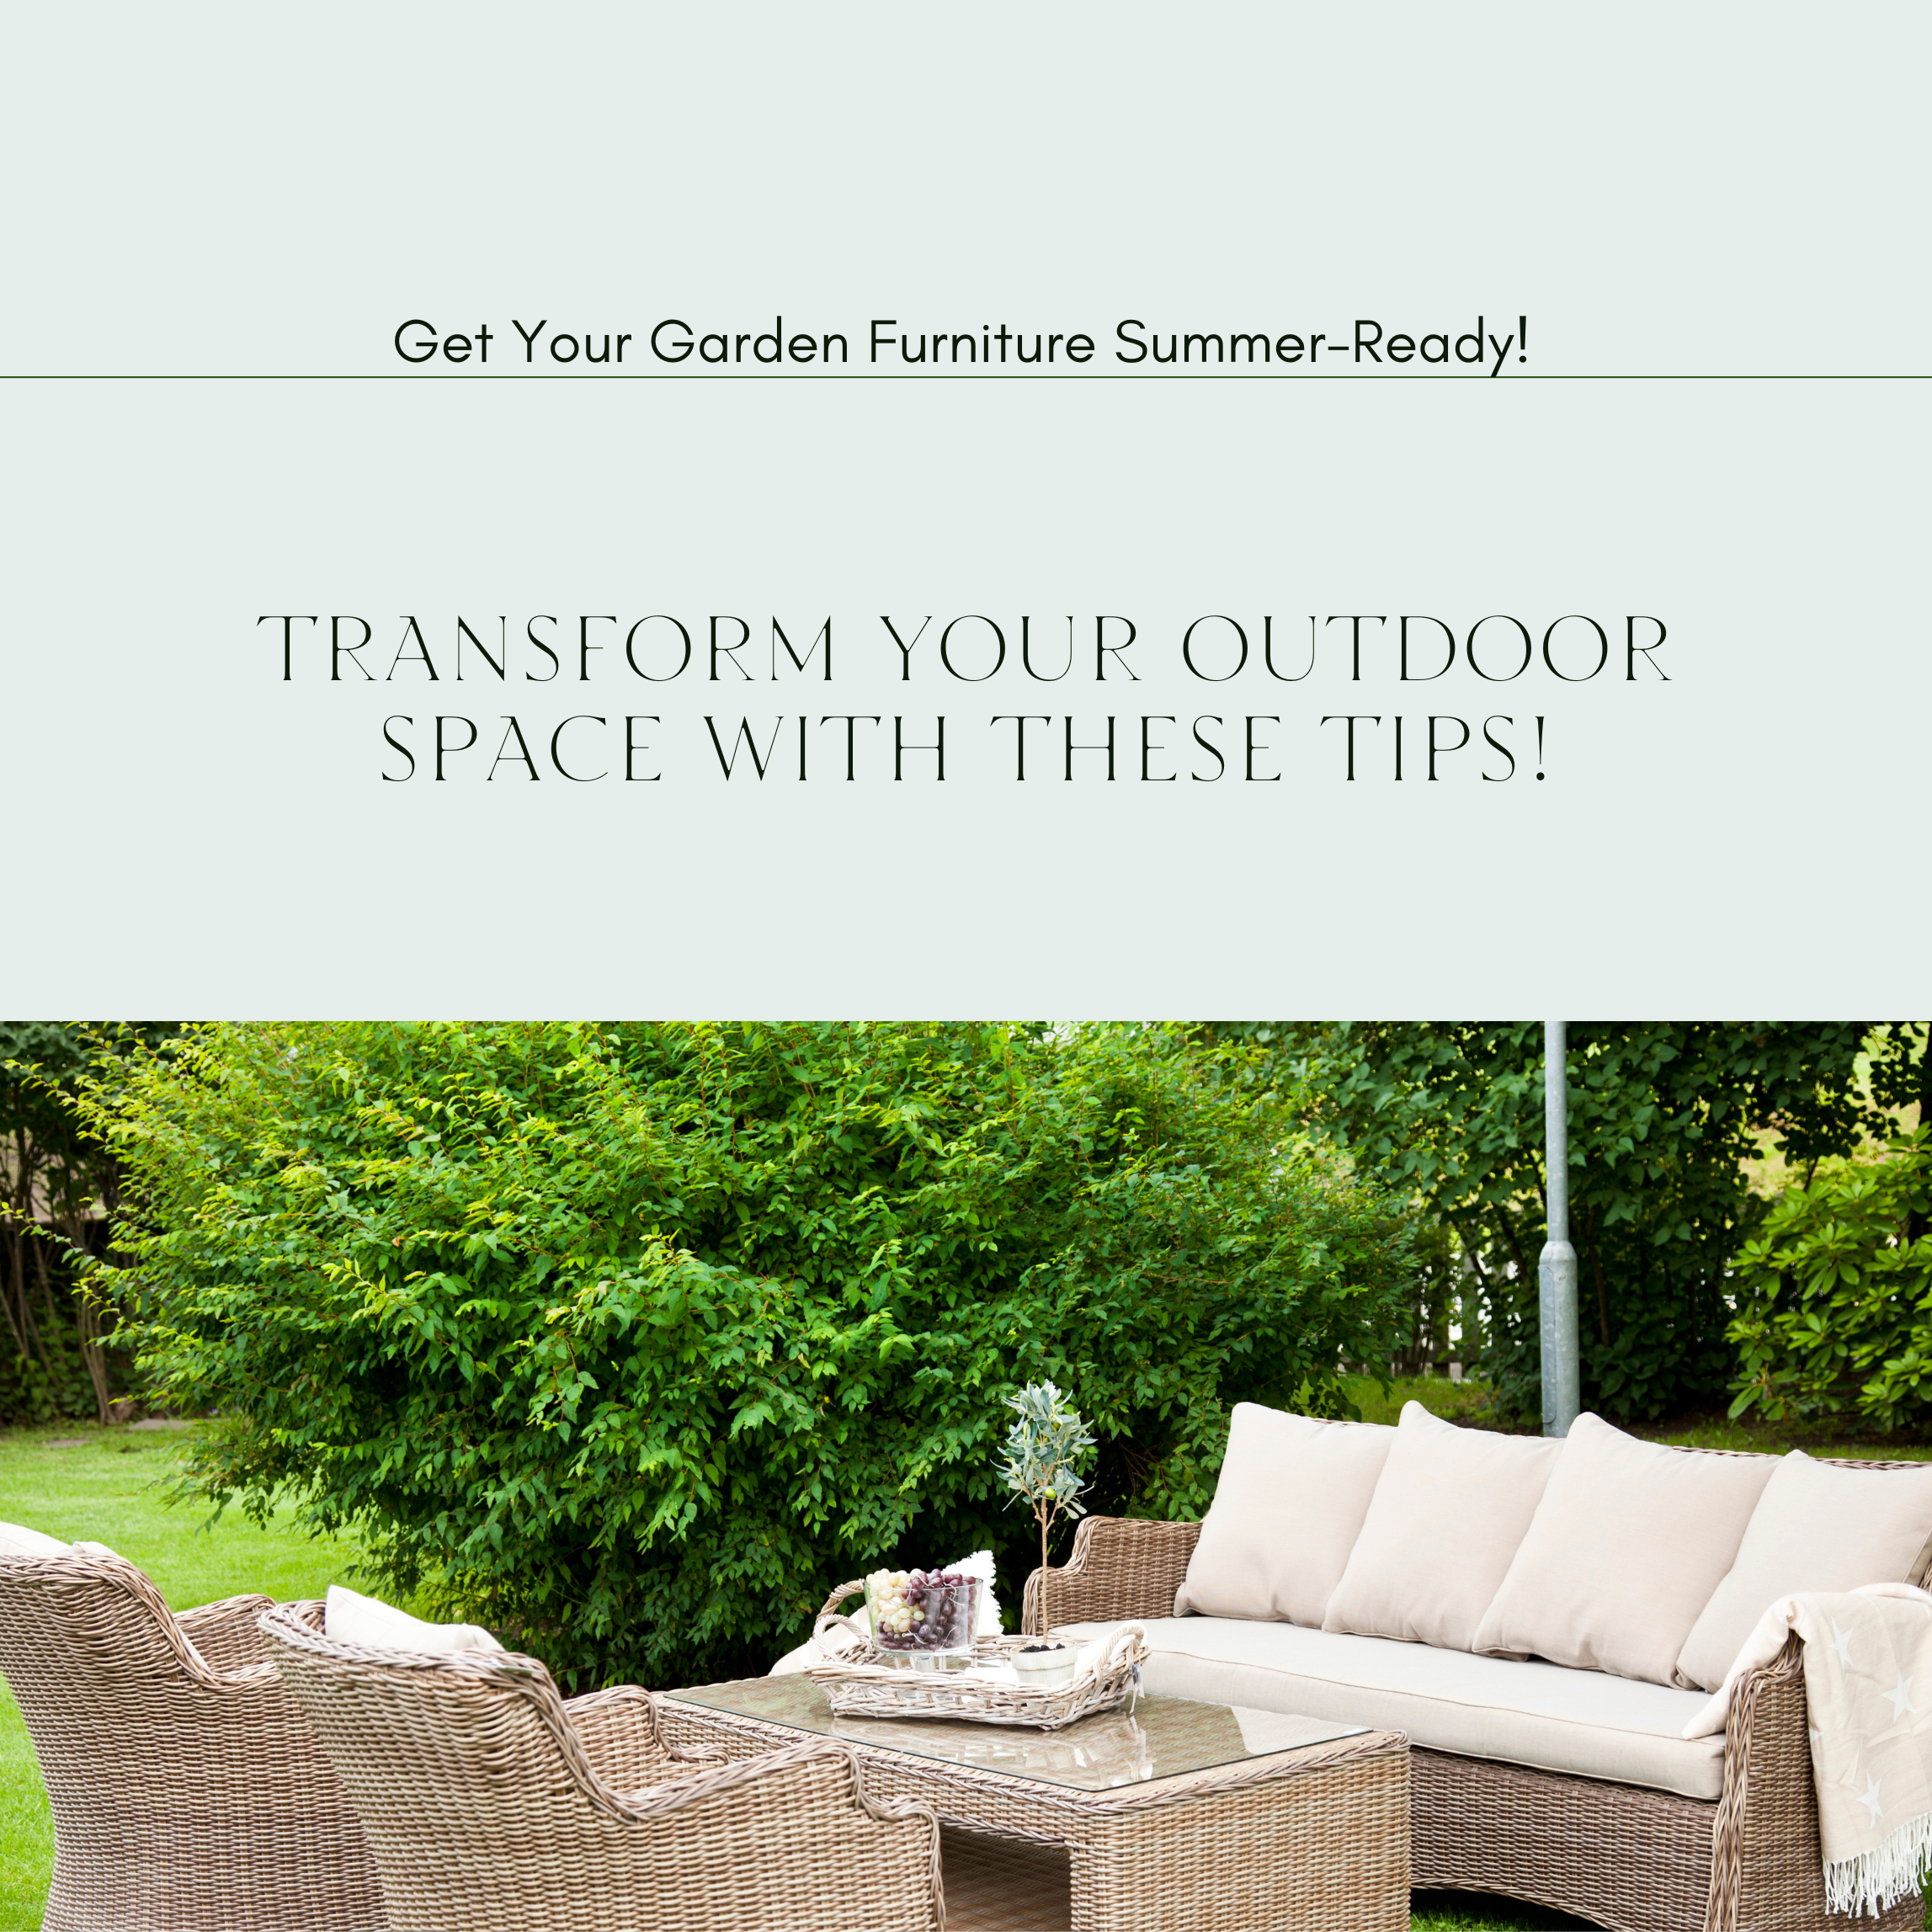 From Grime to Shine: Preparing Your Garden Furniture for Summer Fun